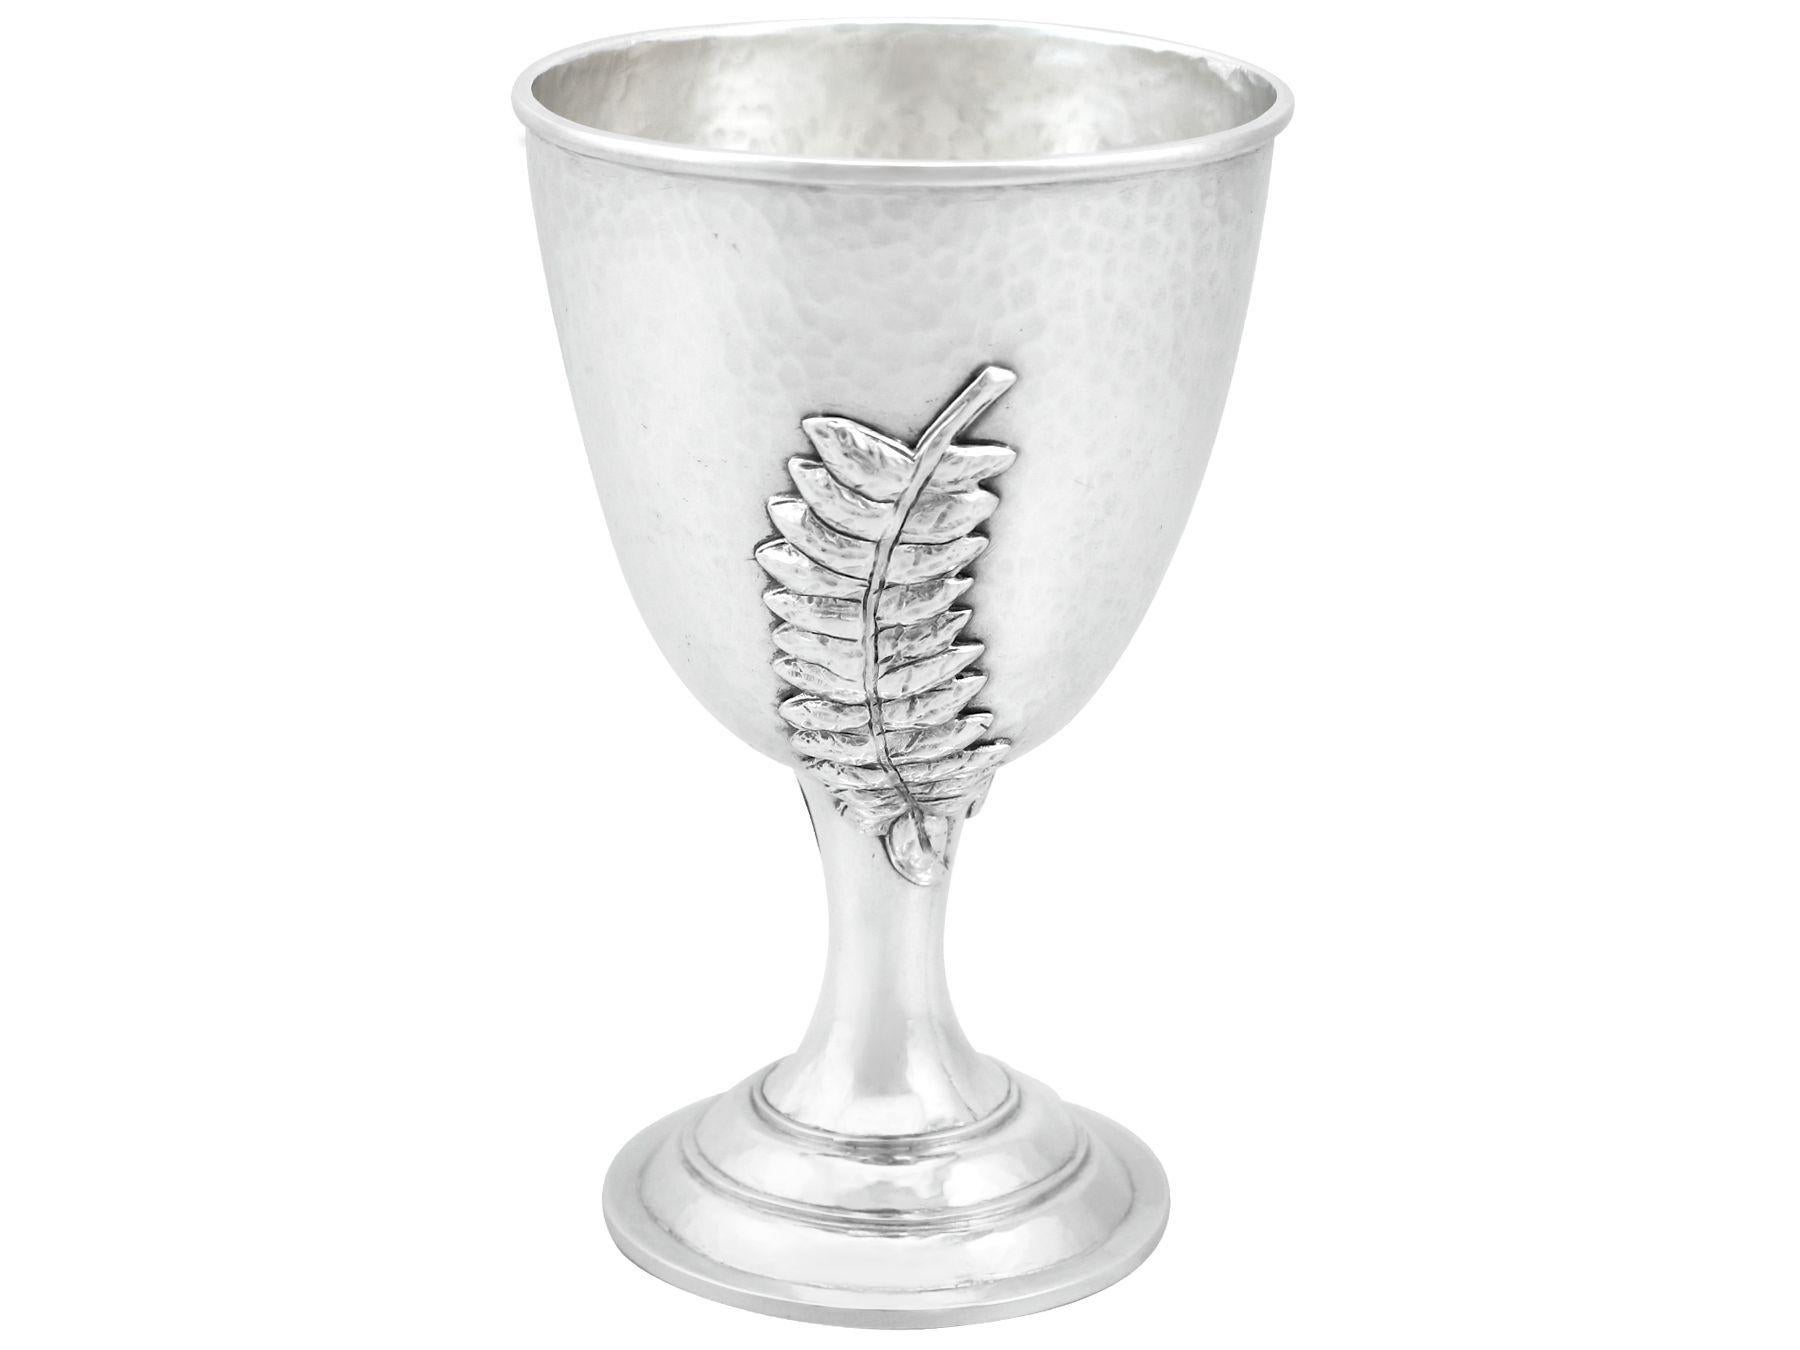 An exceptional, fine and impressive vintage Elizabeth II English sterling silver goblet; an addition to our wine and drinks related silverware collection

This exceptional vintage Elizabeth II sterling silver goblet has a circular bell-shaped form